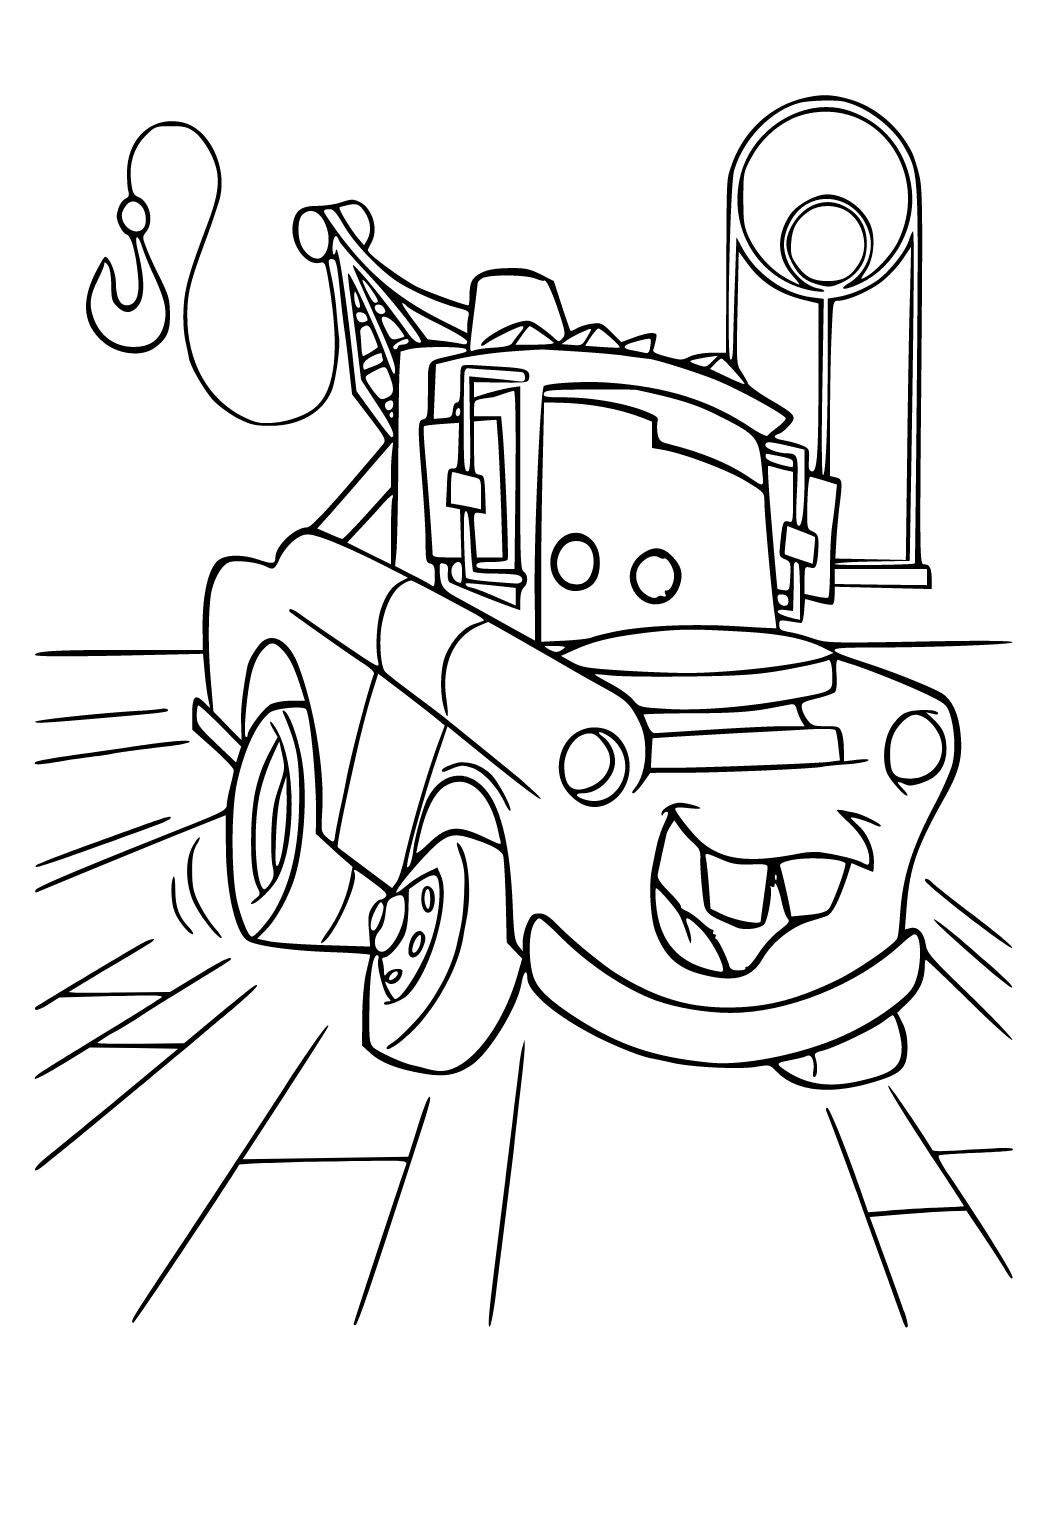 Free printable cars friend coloring page for adults and kids